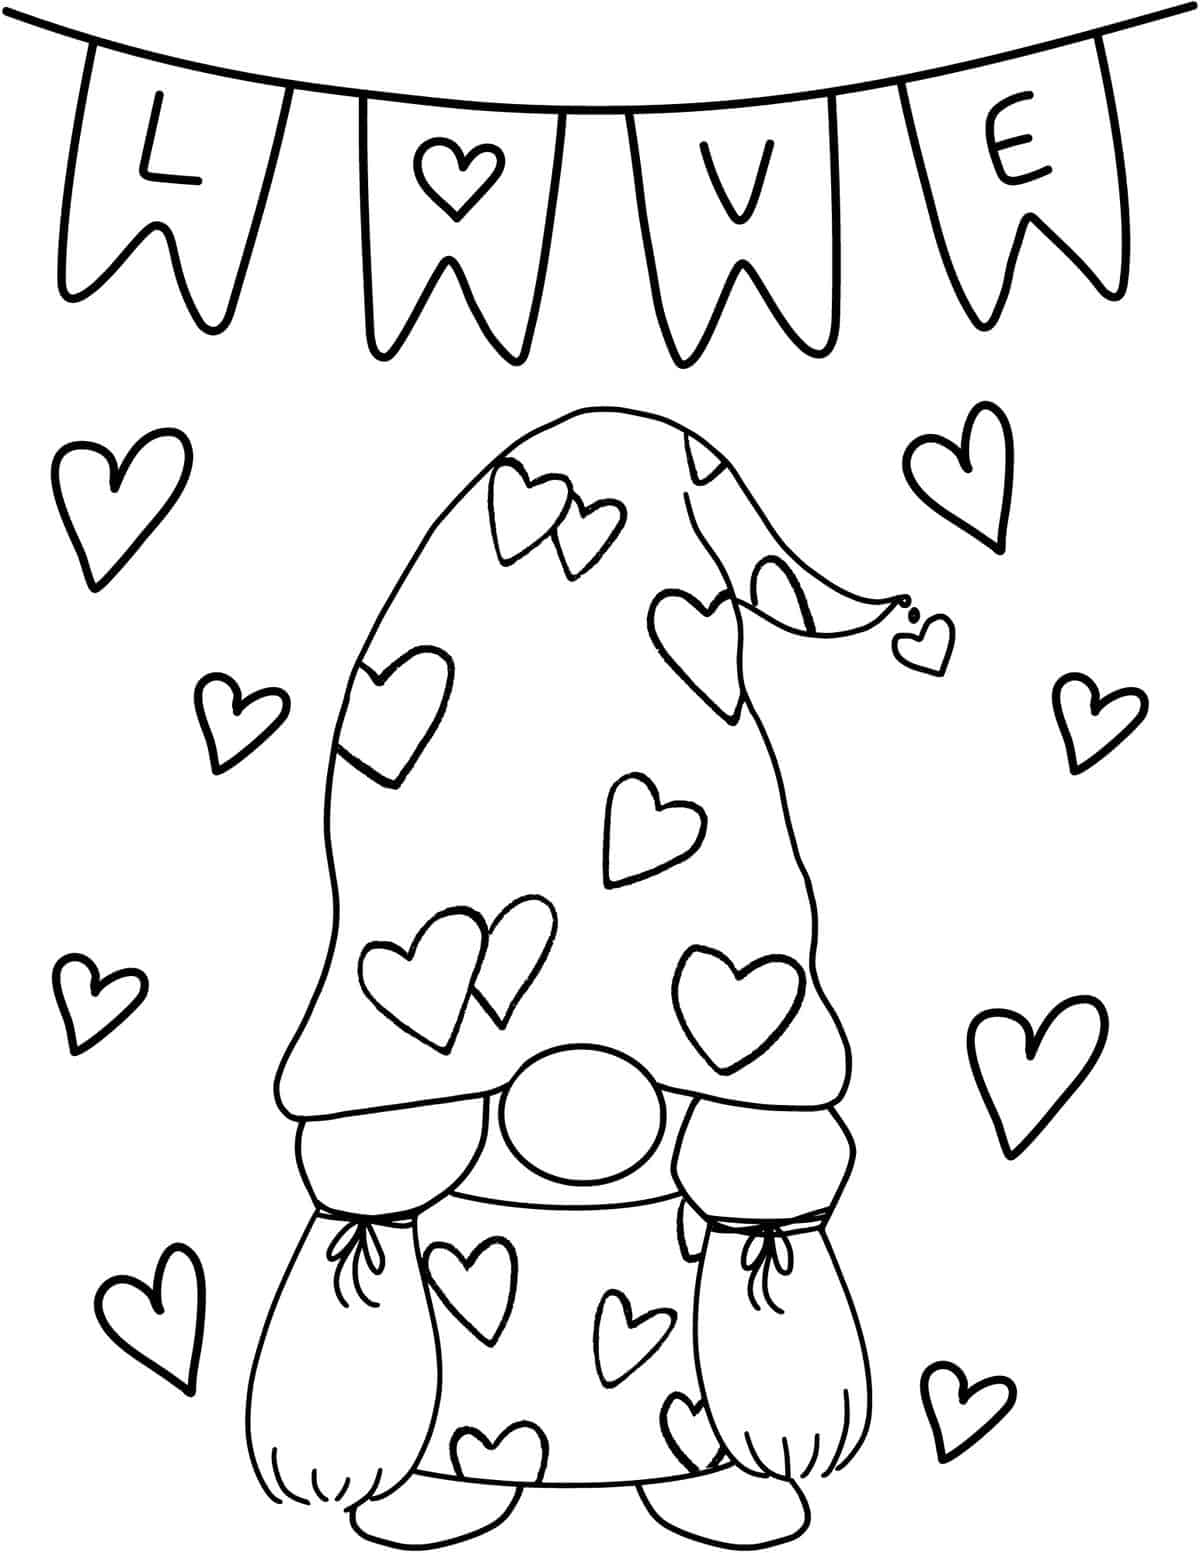 Valentine's Day gnome coloring page